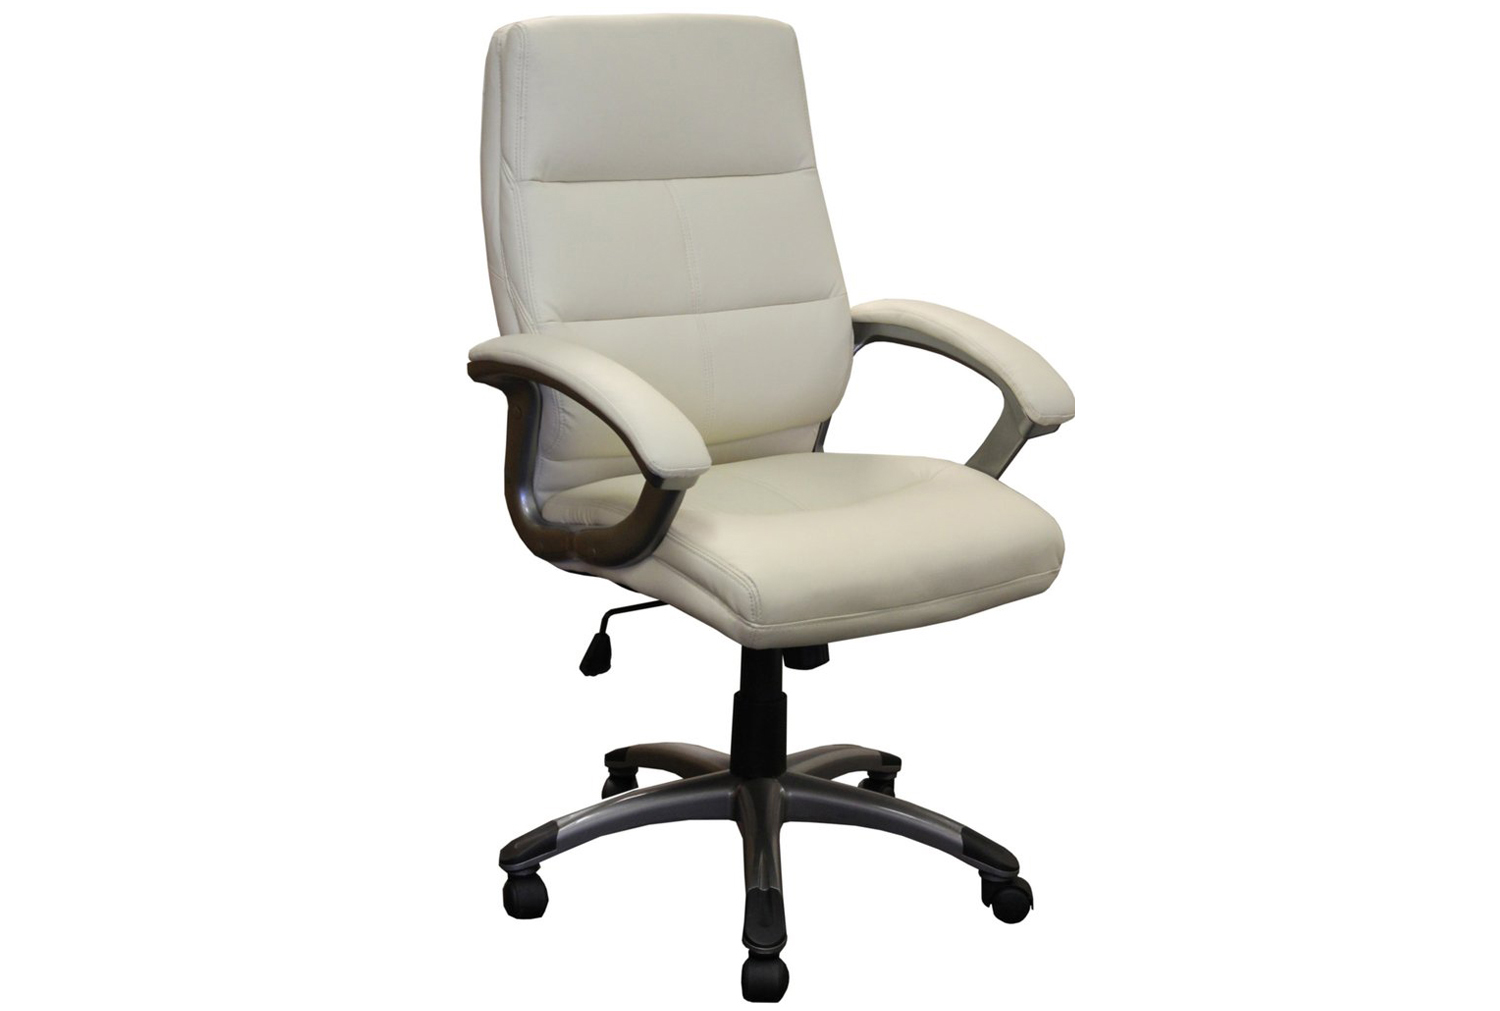 Telford Cream Executive Office Chair, Express Delivery